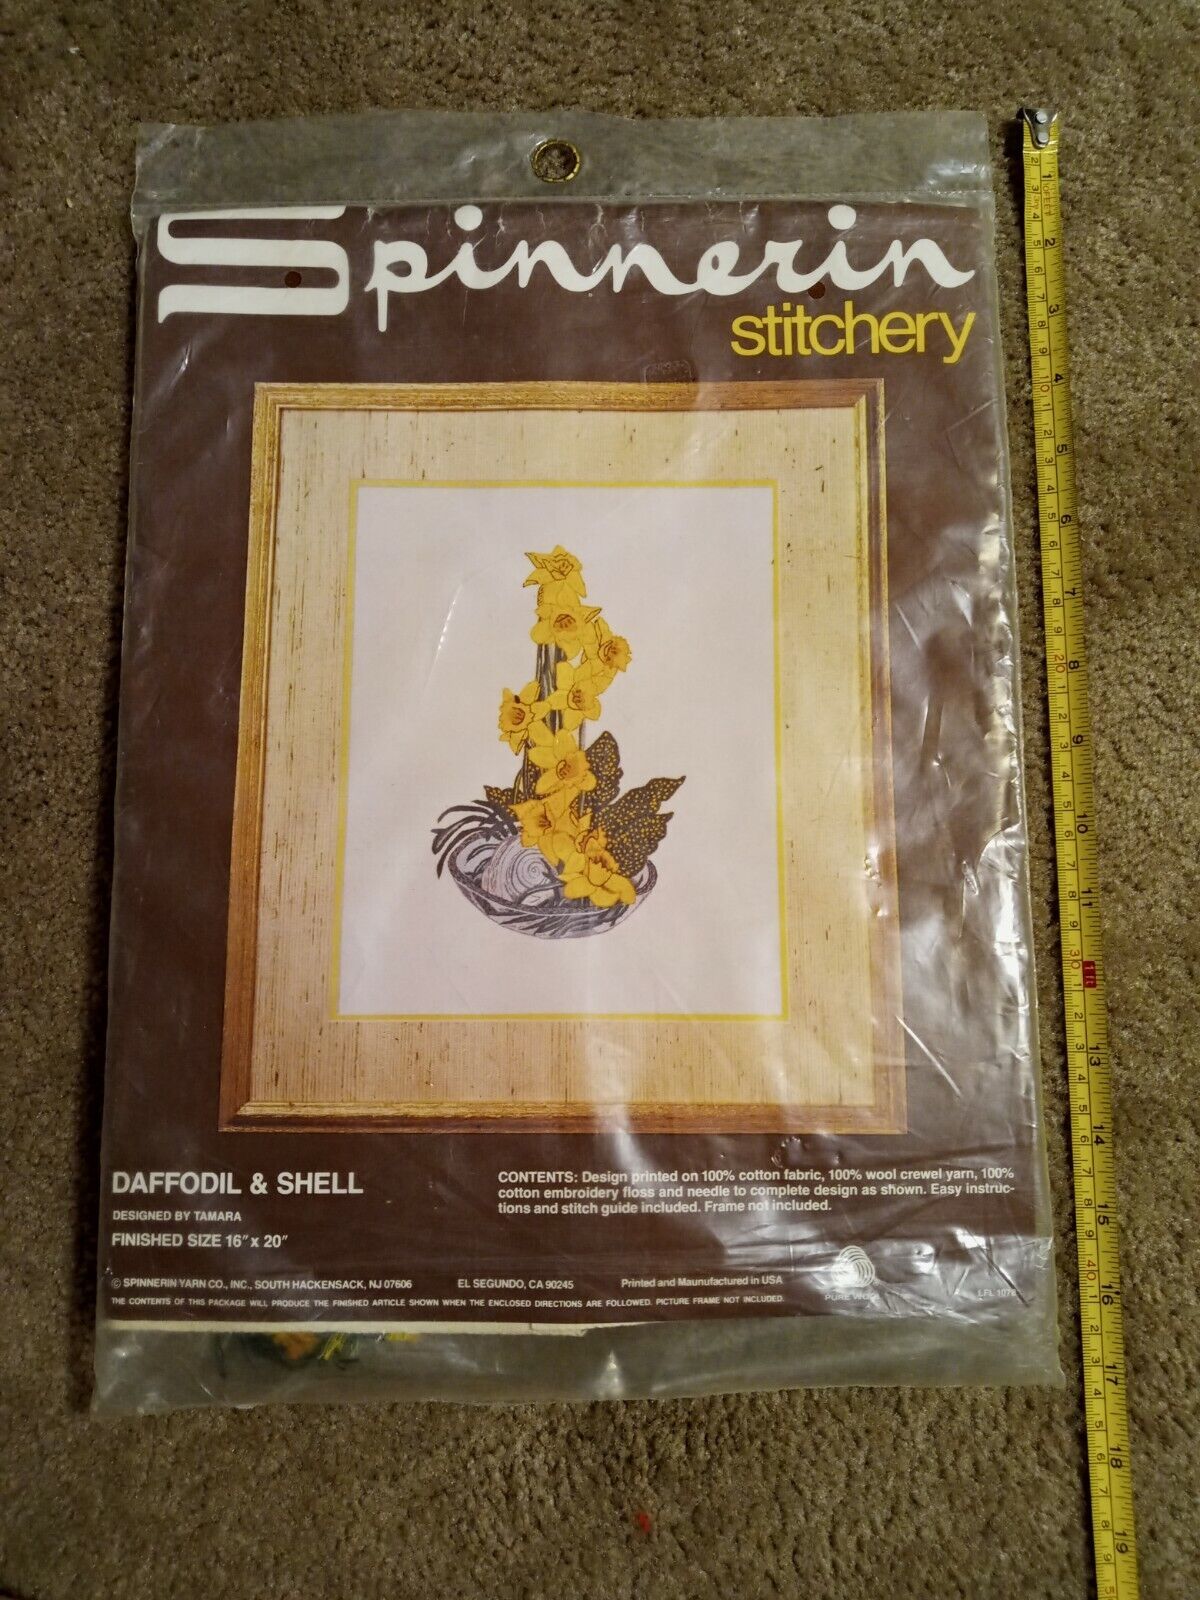 NEW VTG Spinnerin Stitchery Embroidery Kit Daffodil and Shell FAST SHIPPING - $14.30